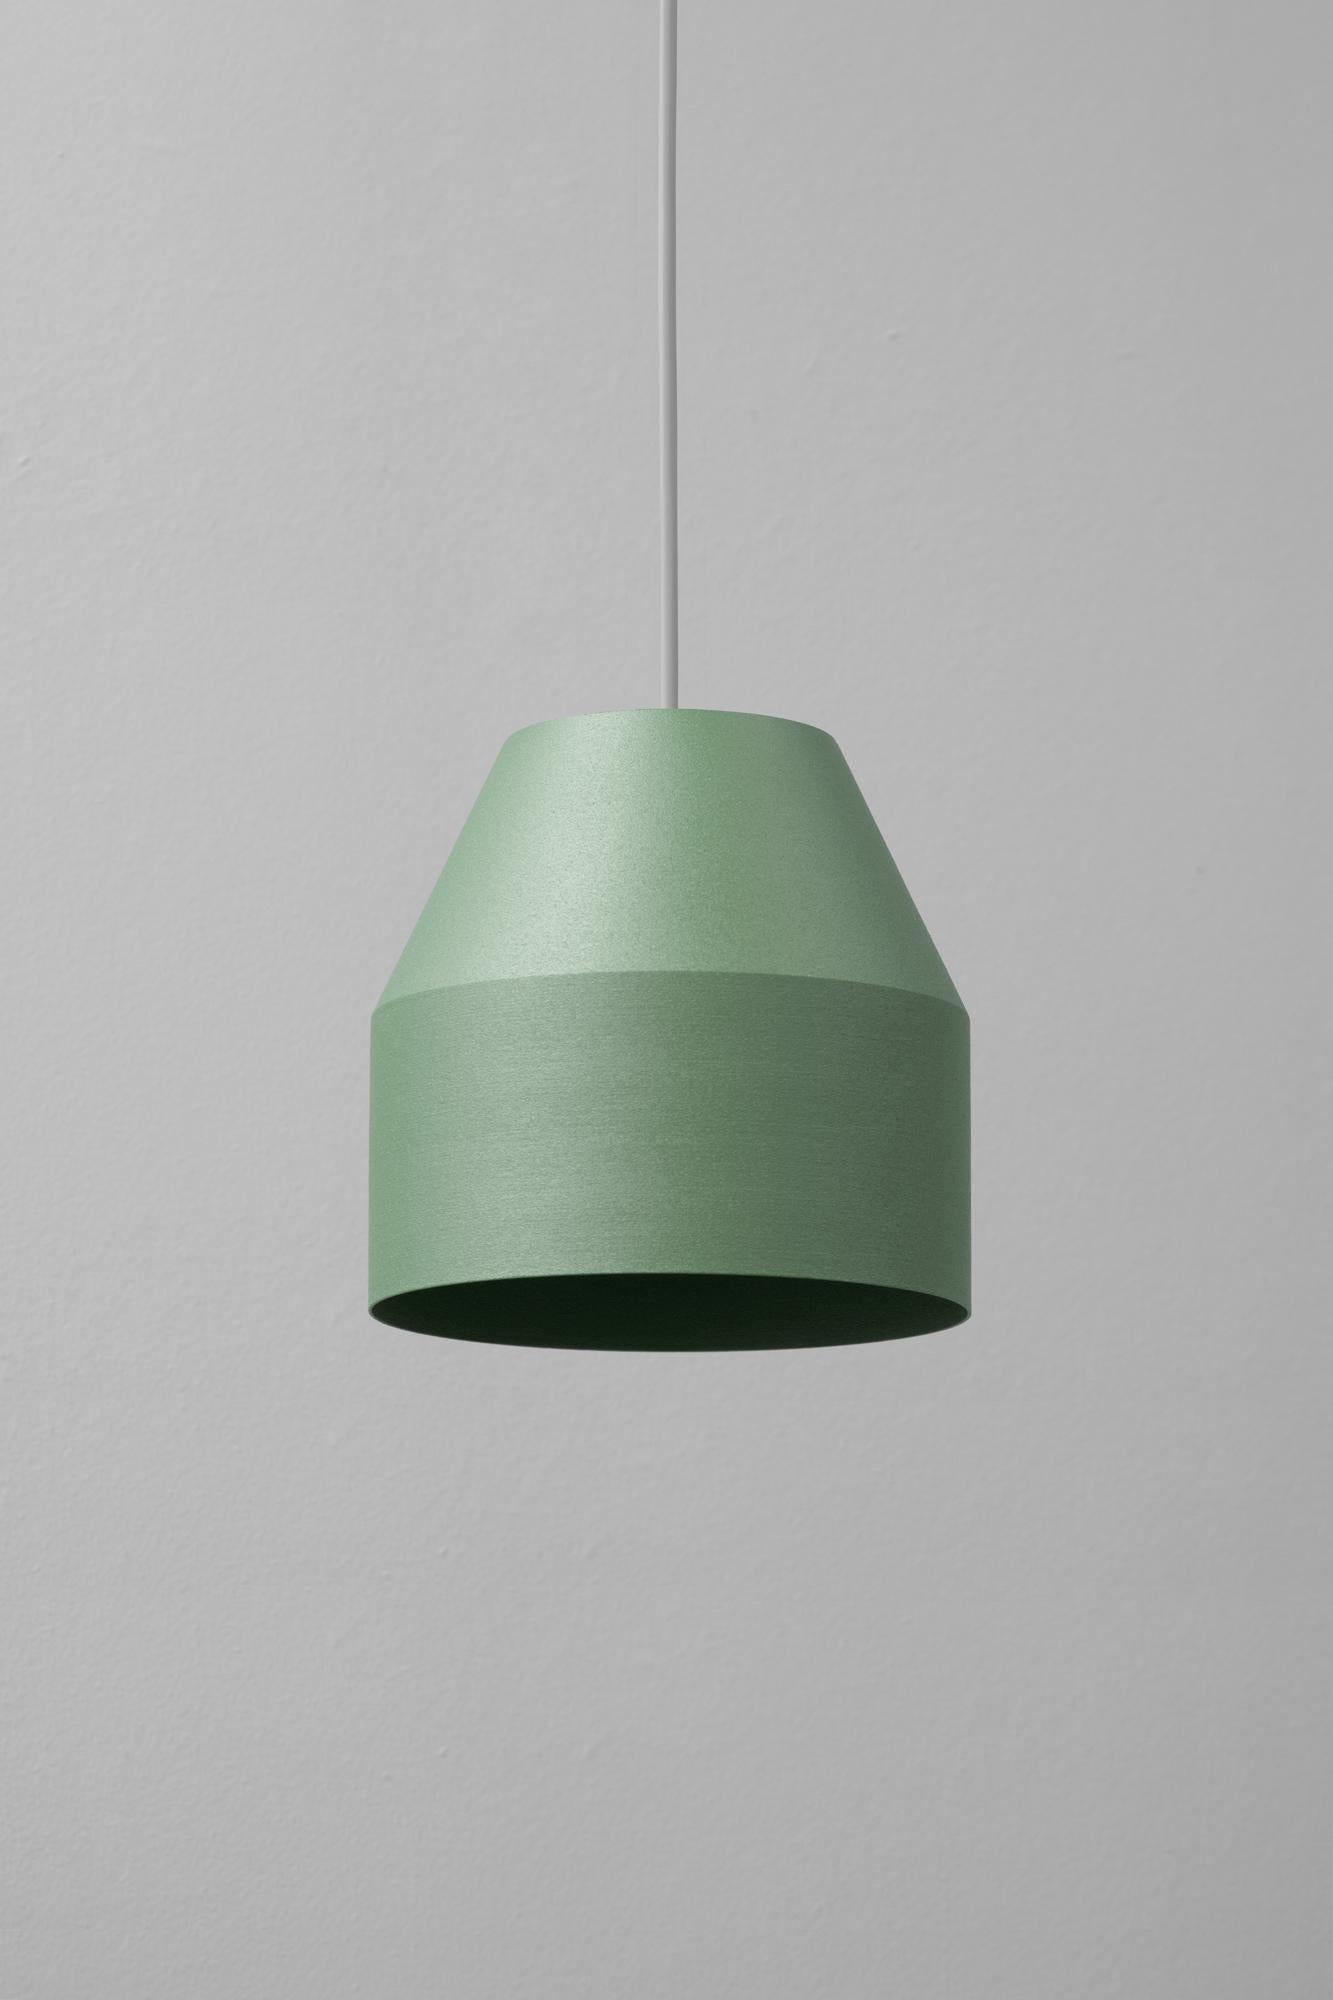 Big Moss Cap Pendant Lamp by +kouple
Dimensions: Ø 16 x H 16,5 cm. 
Materials: Powder-coated steel.

Available in different color options. Available in two different sizes. The rod length is 200 cm. Please contact us.

All our lamps can be wired